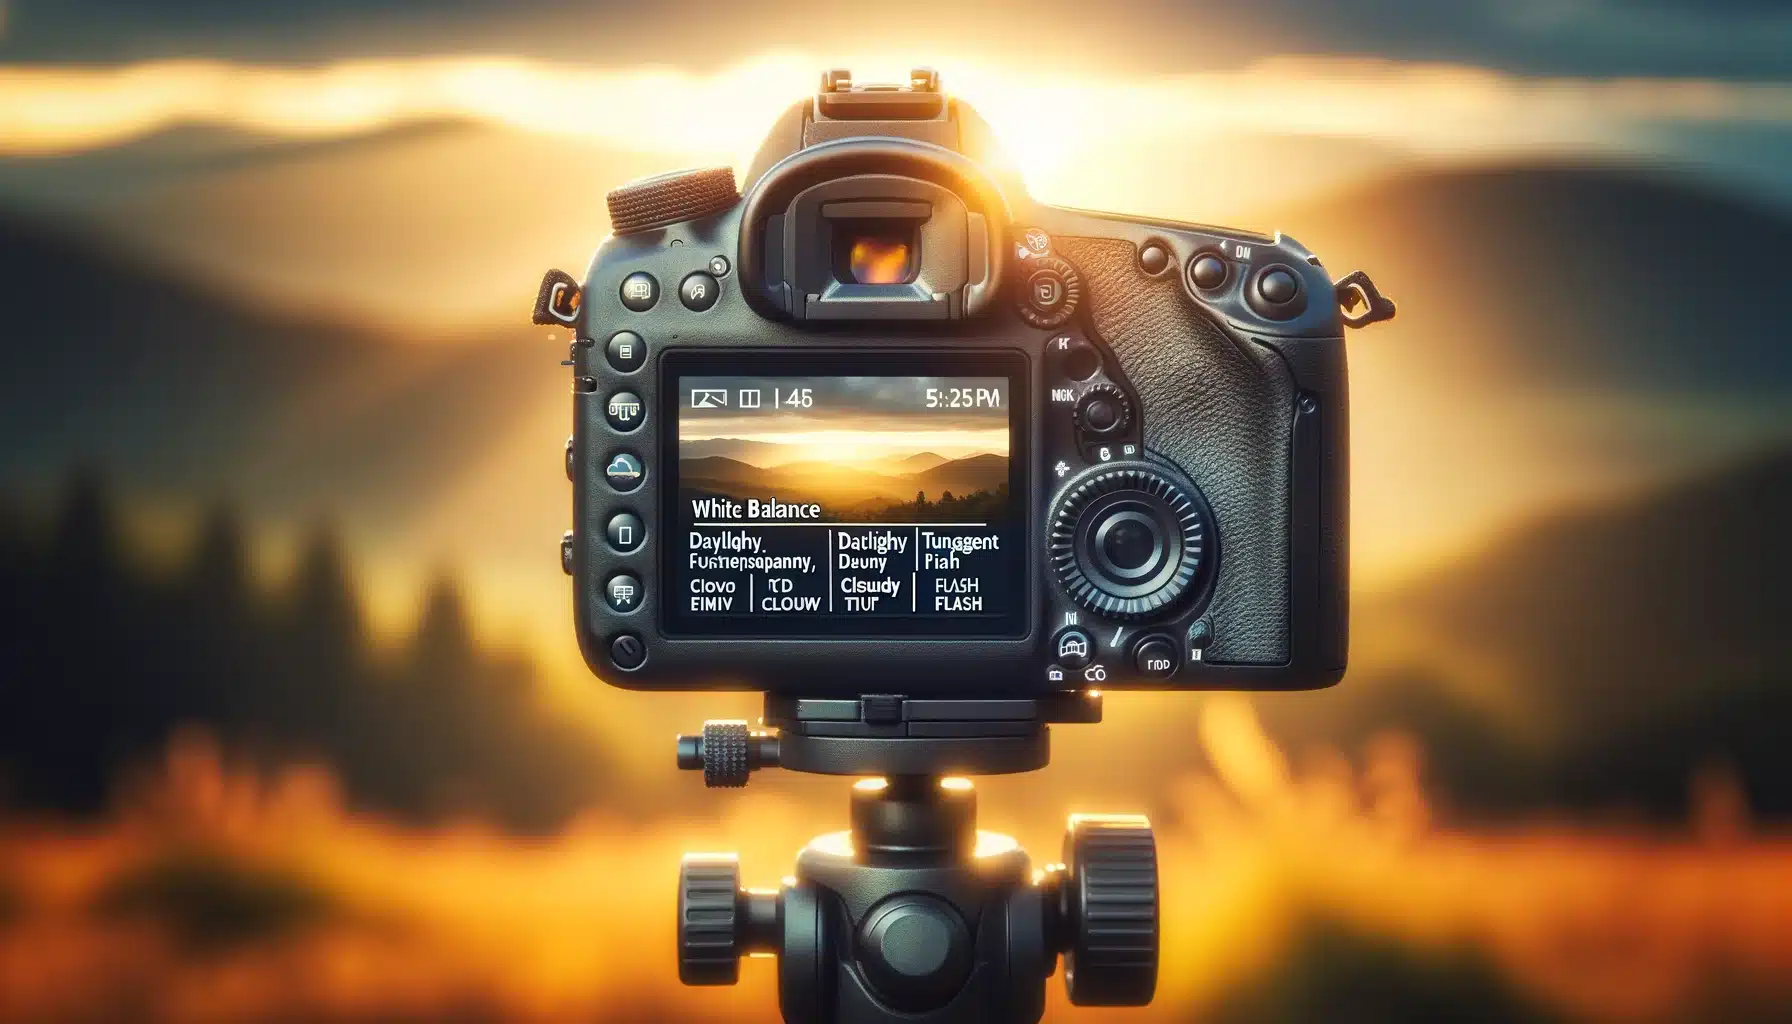 DSLR camera on a tripod outdoors with the white balance settings menu displayed on the LCD screen, showing options like Daylight and Cloudy, during the golden hour.